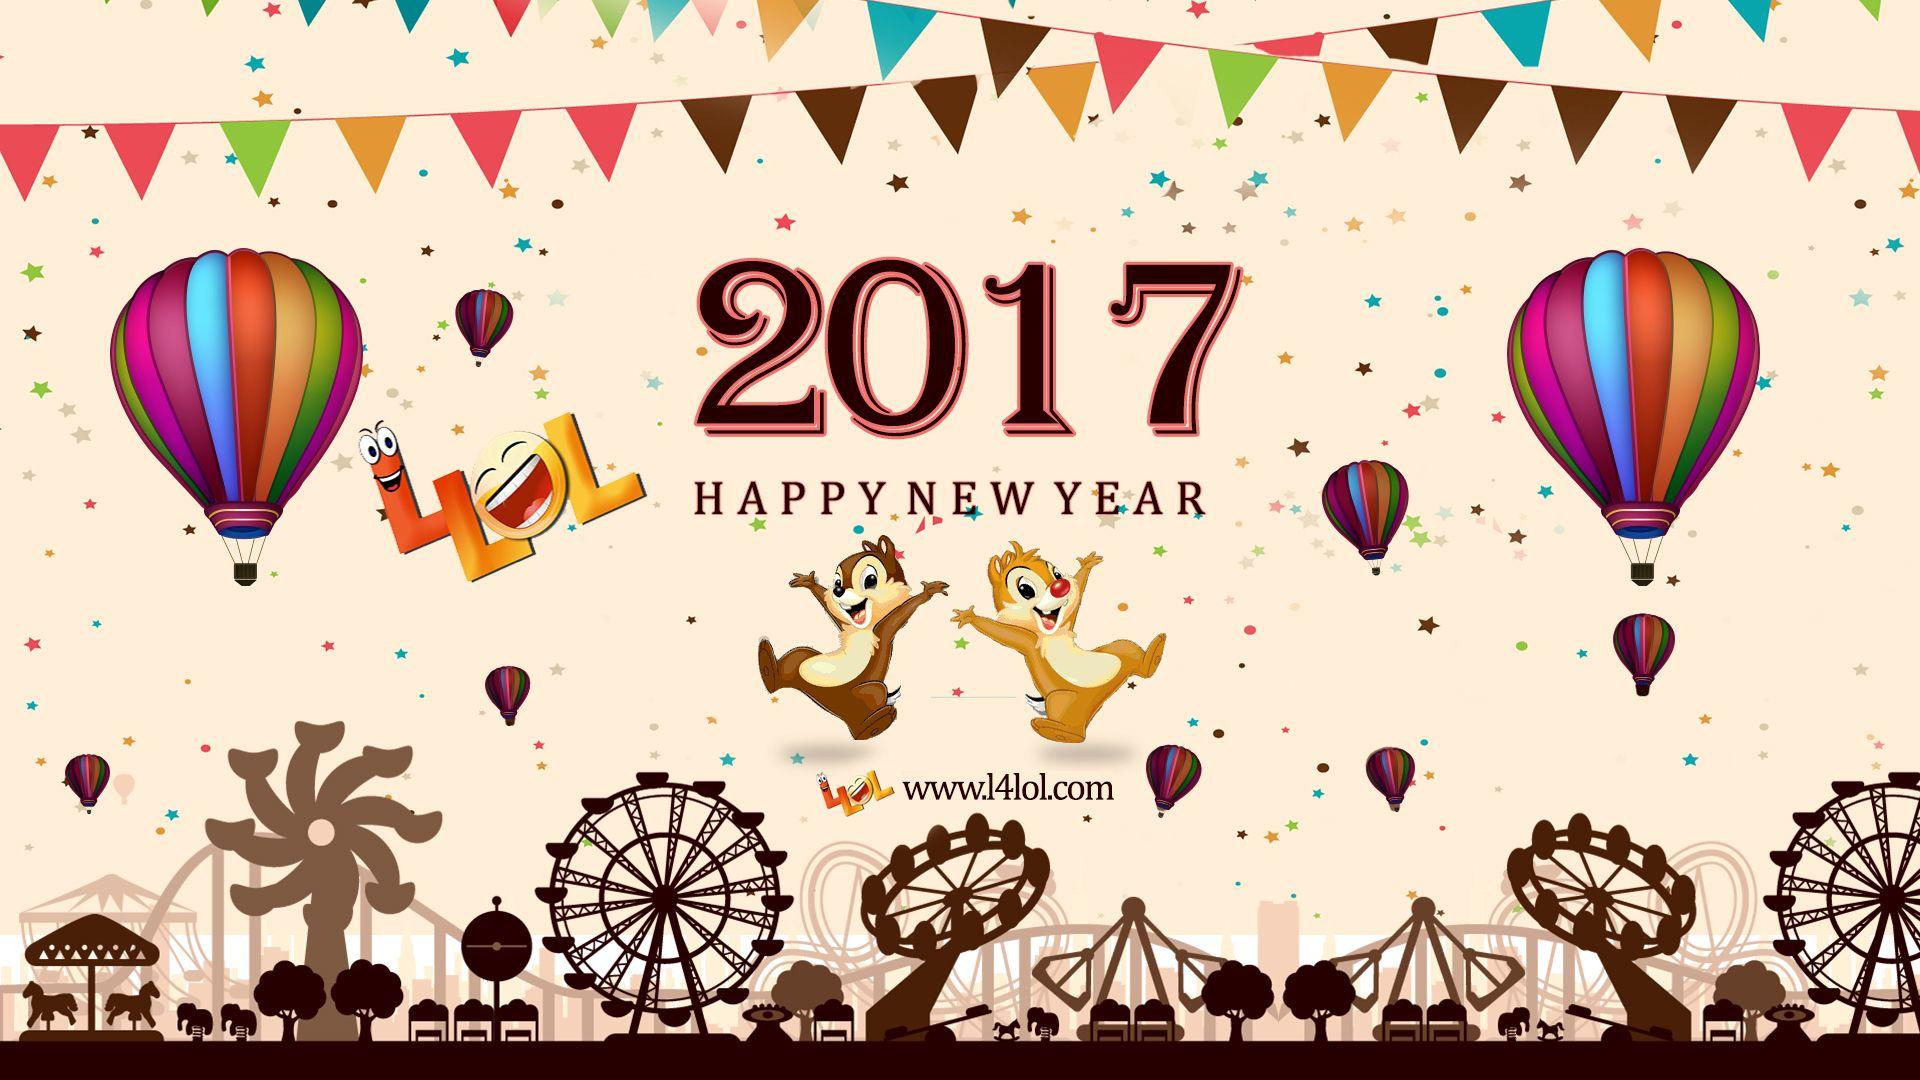 Happy New Year 2017 Image Wallpaper for Whatsapp Facebook